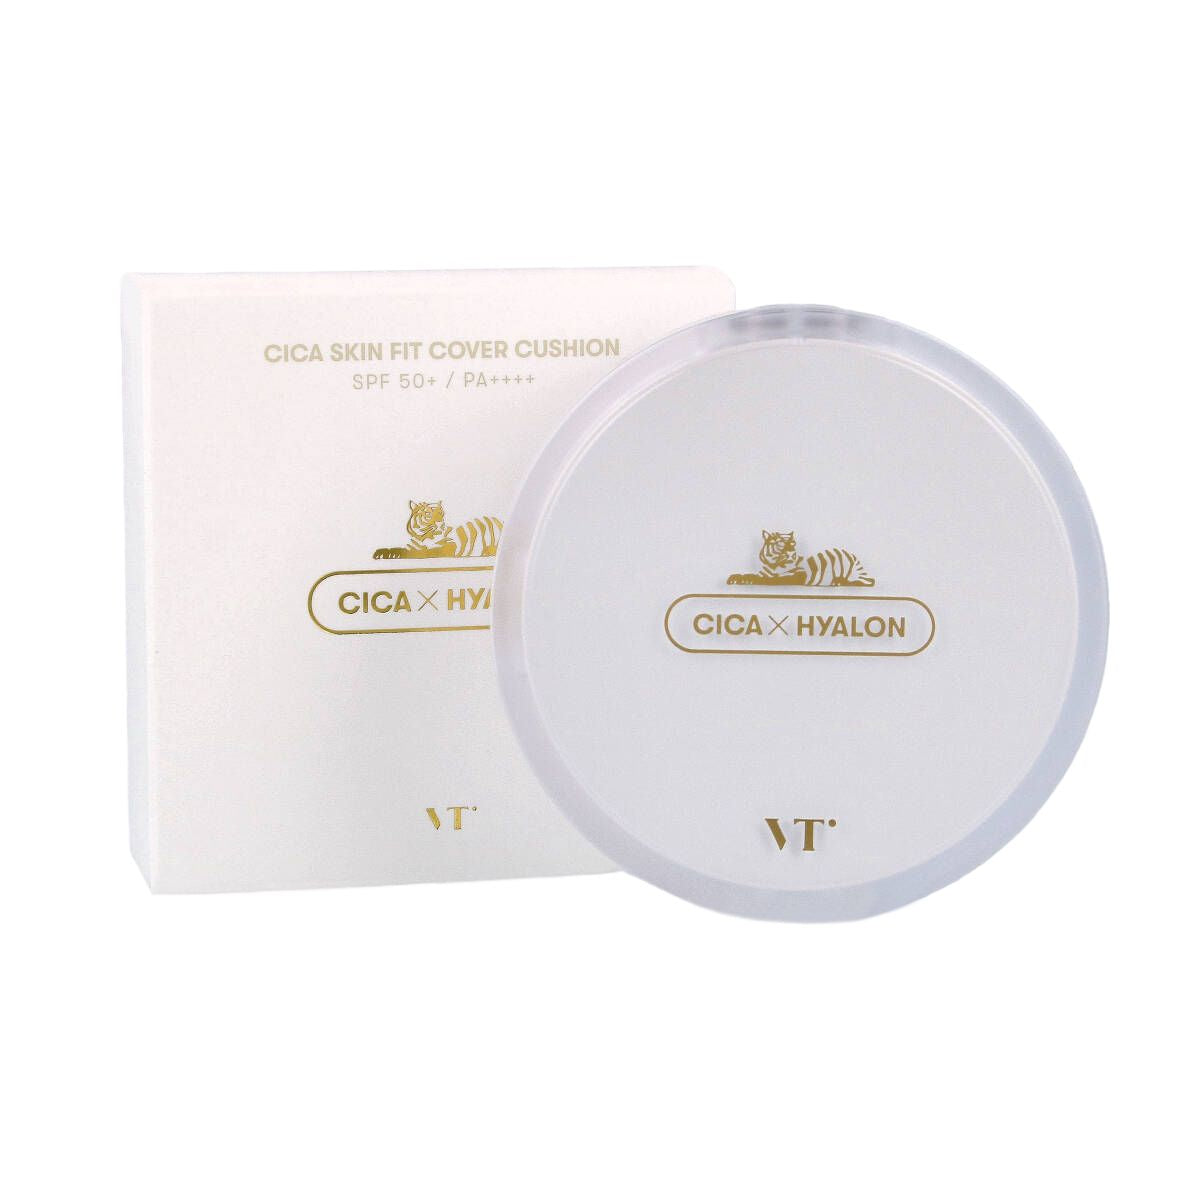 VT - Cica Skin Fit Cover Cushion